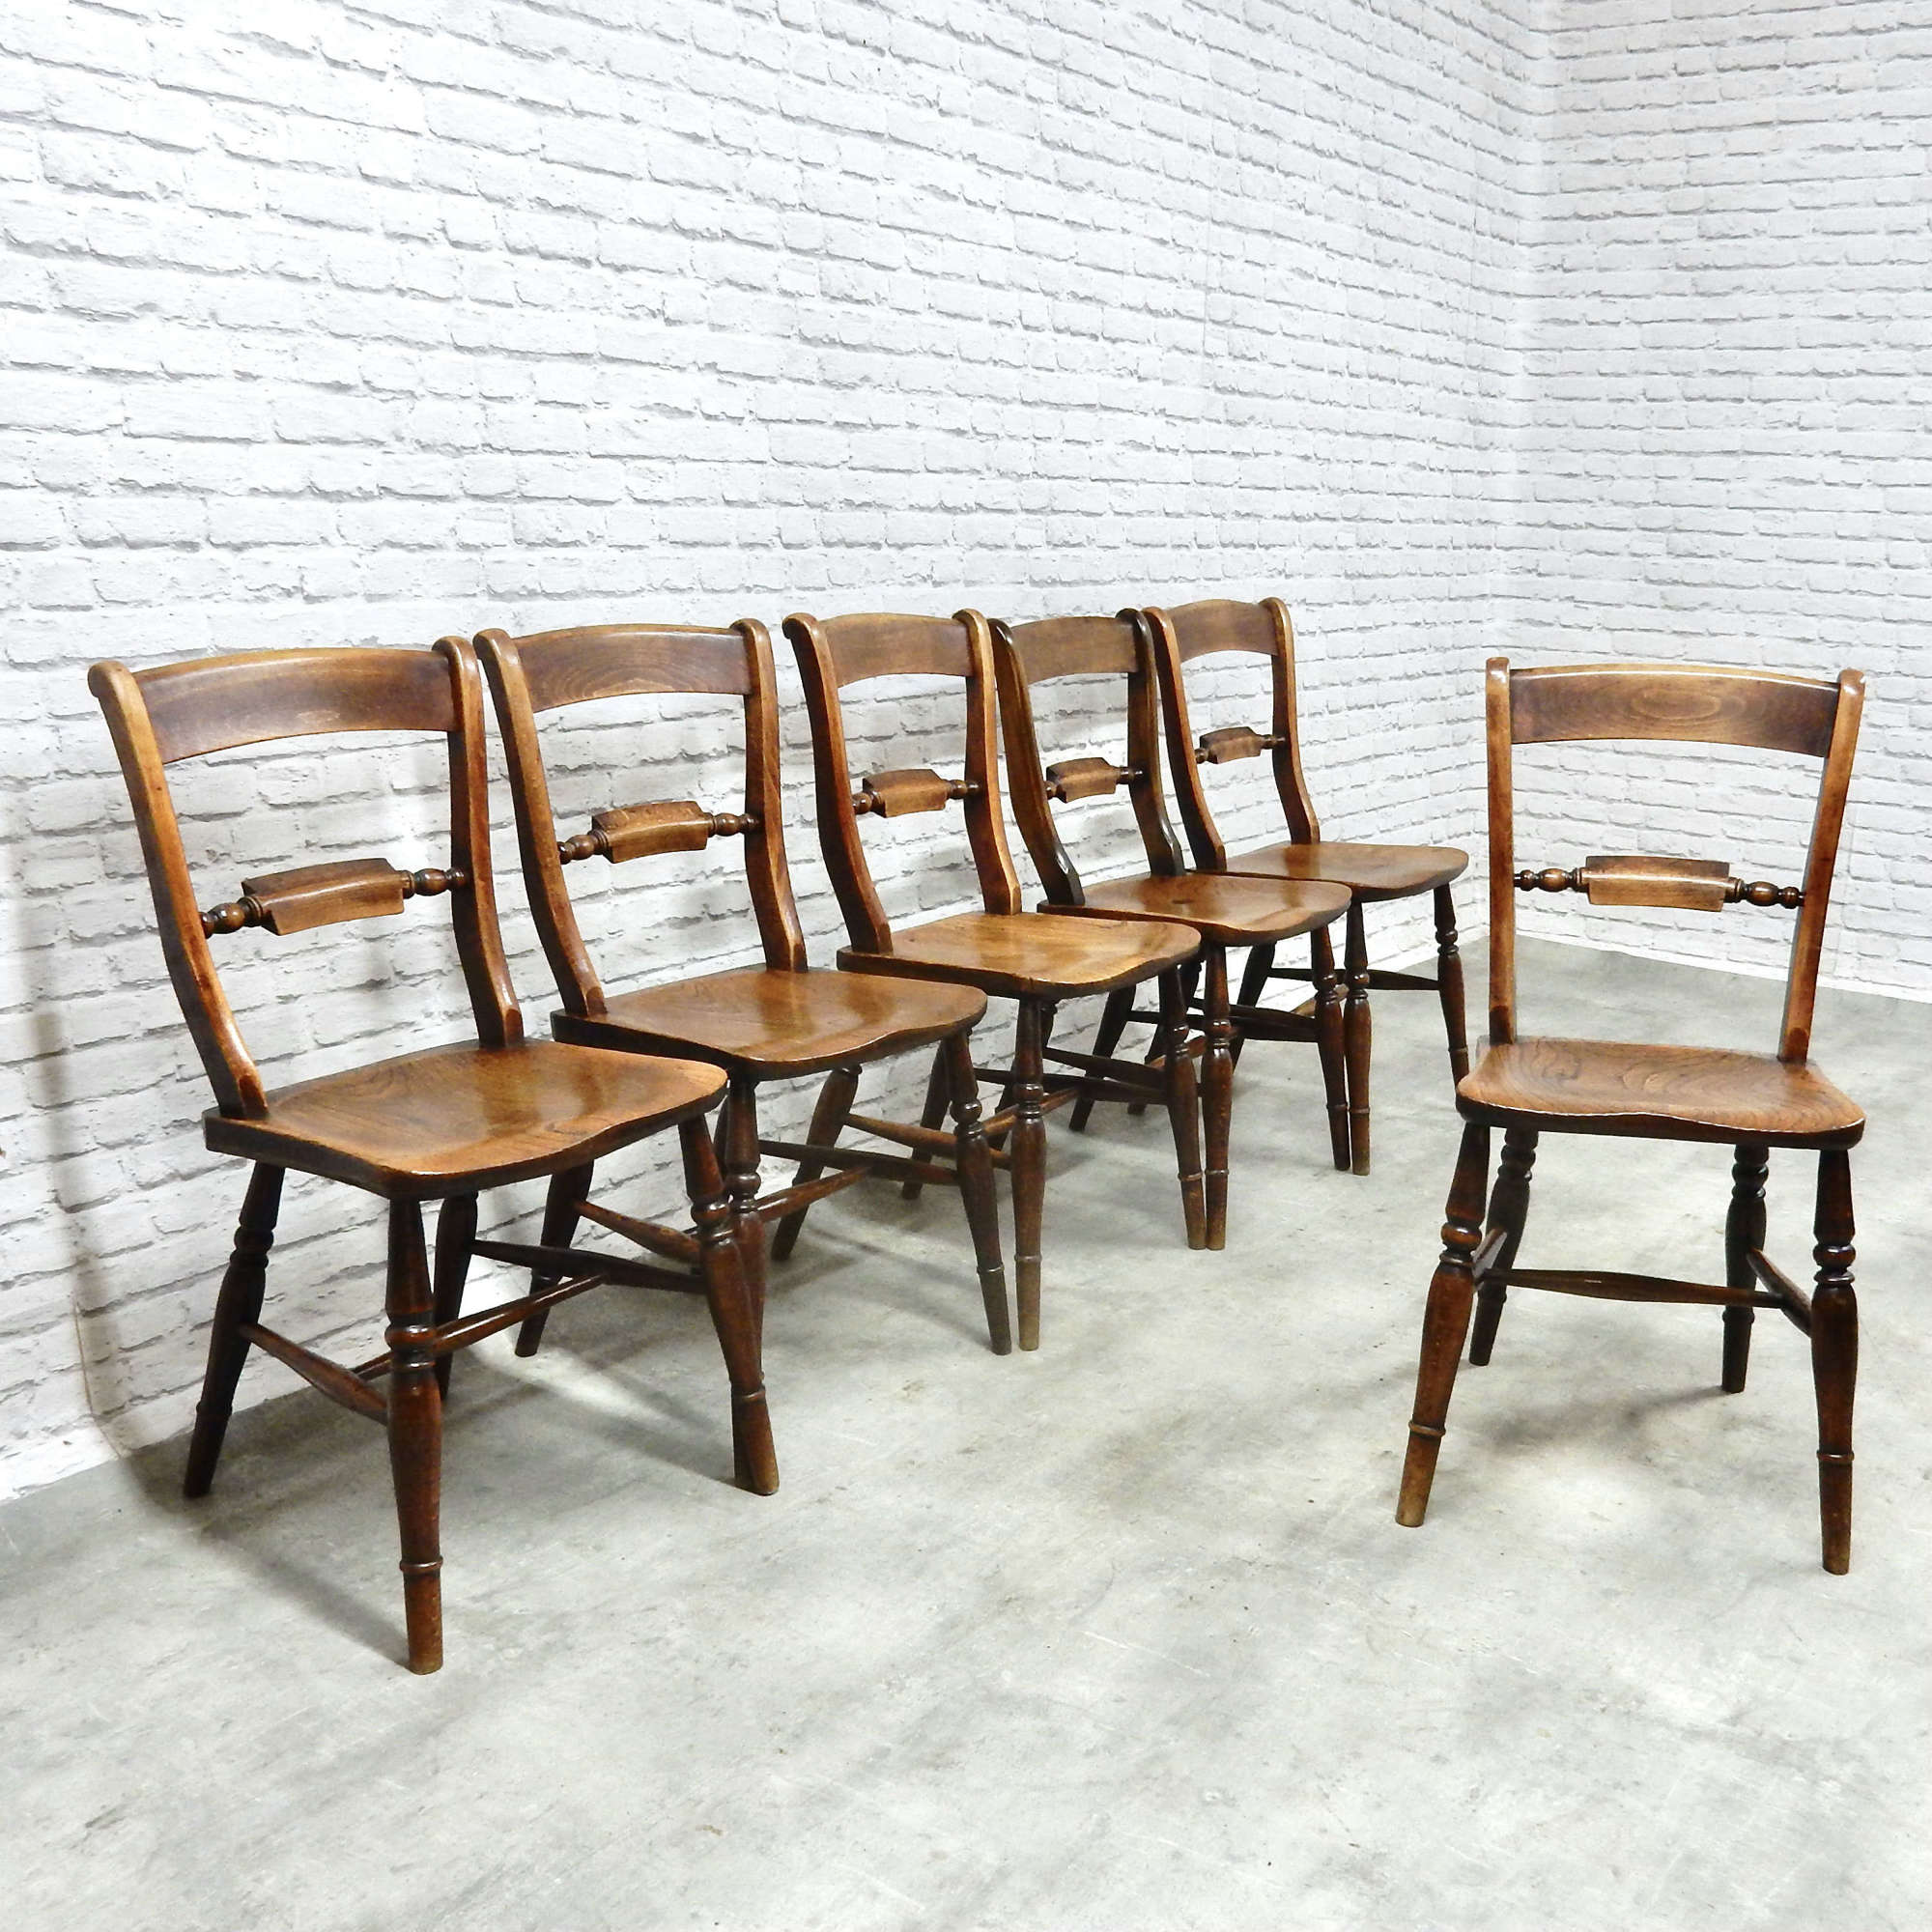 Named Oxford Windsor Kitchen Chairs